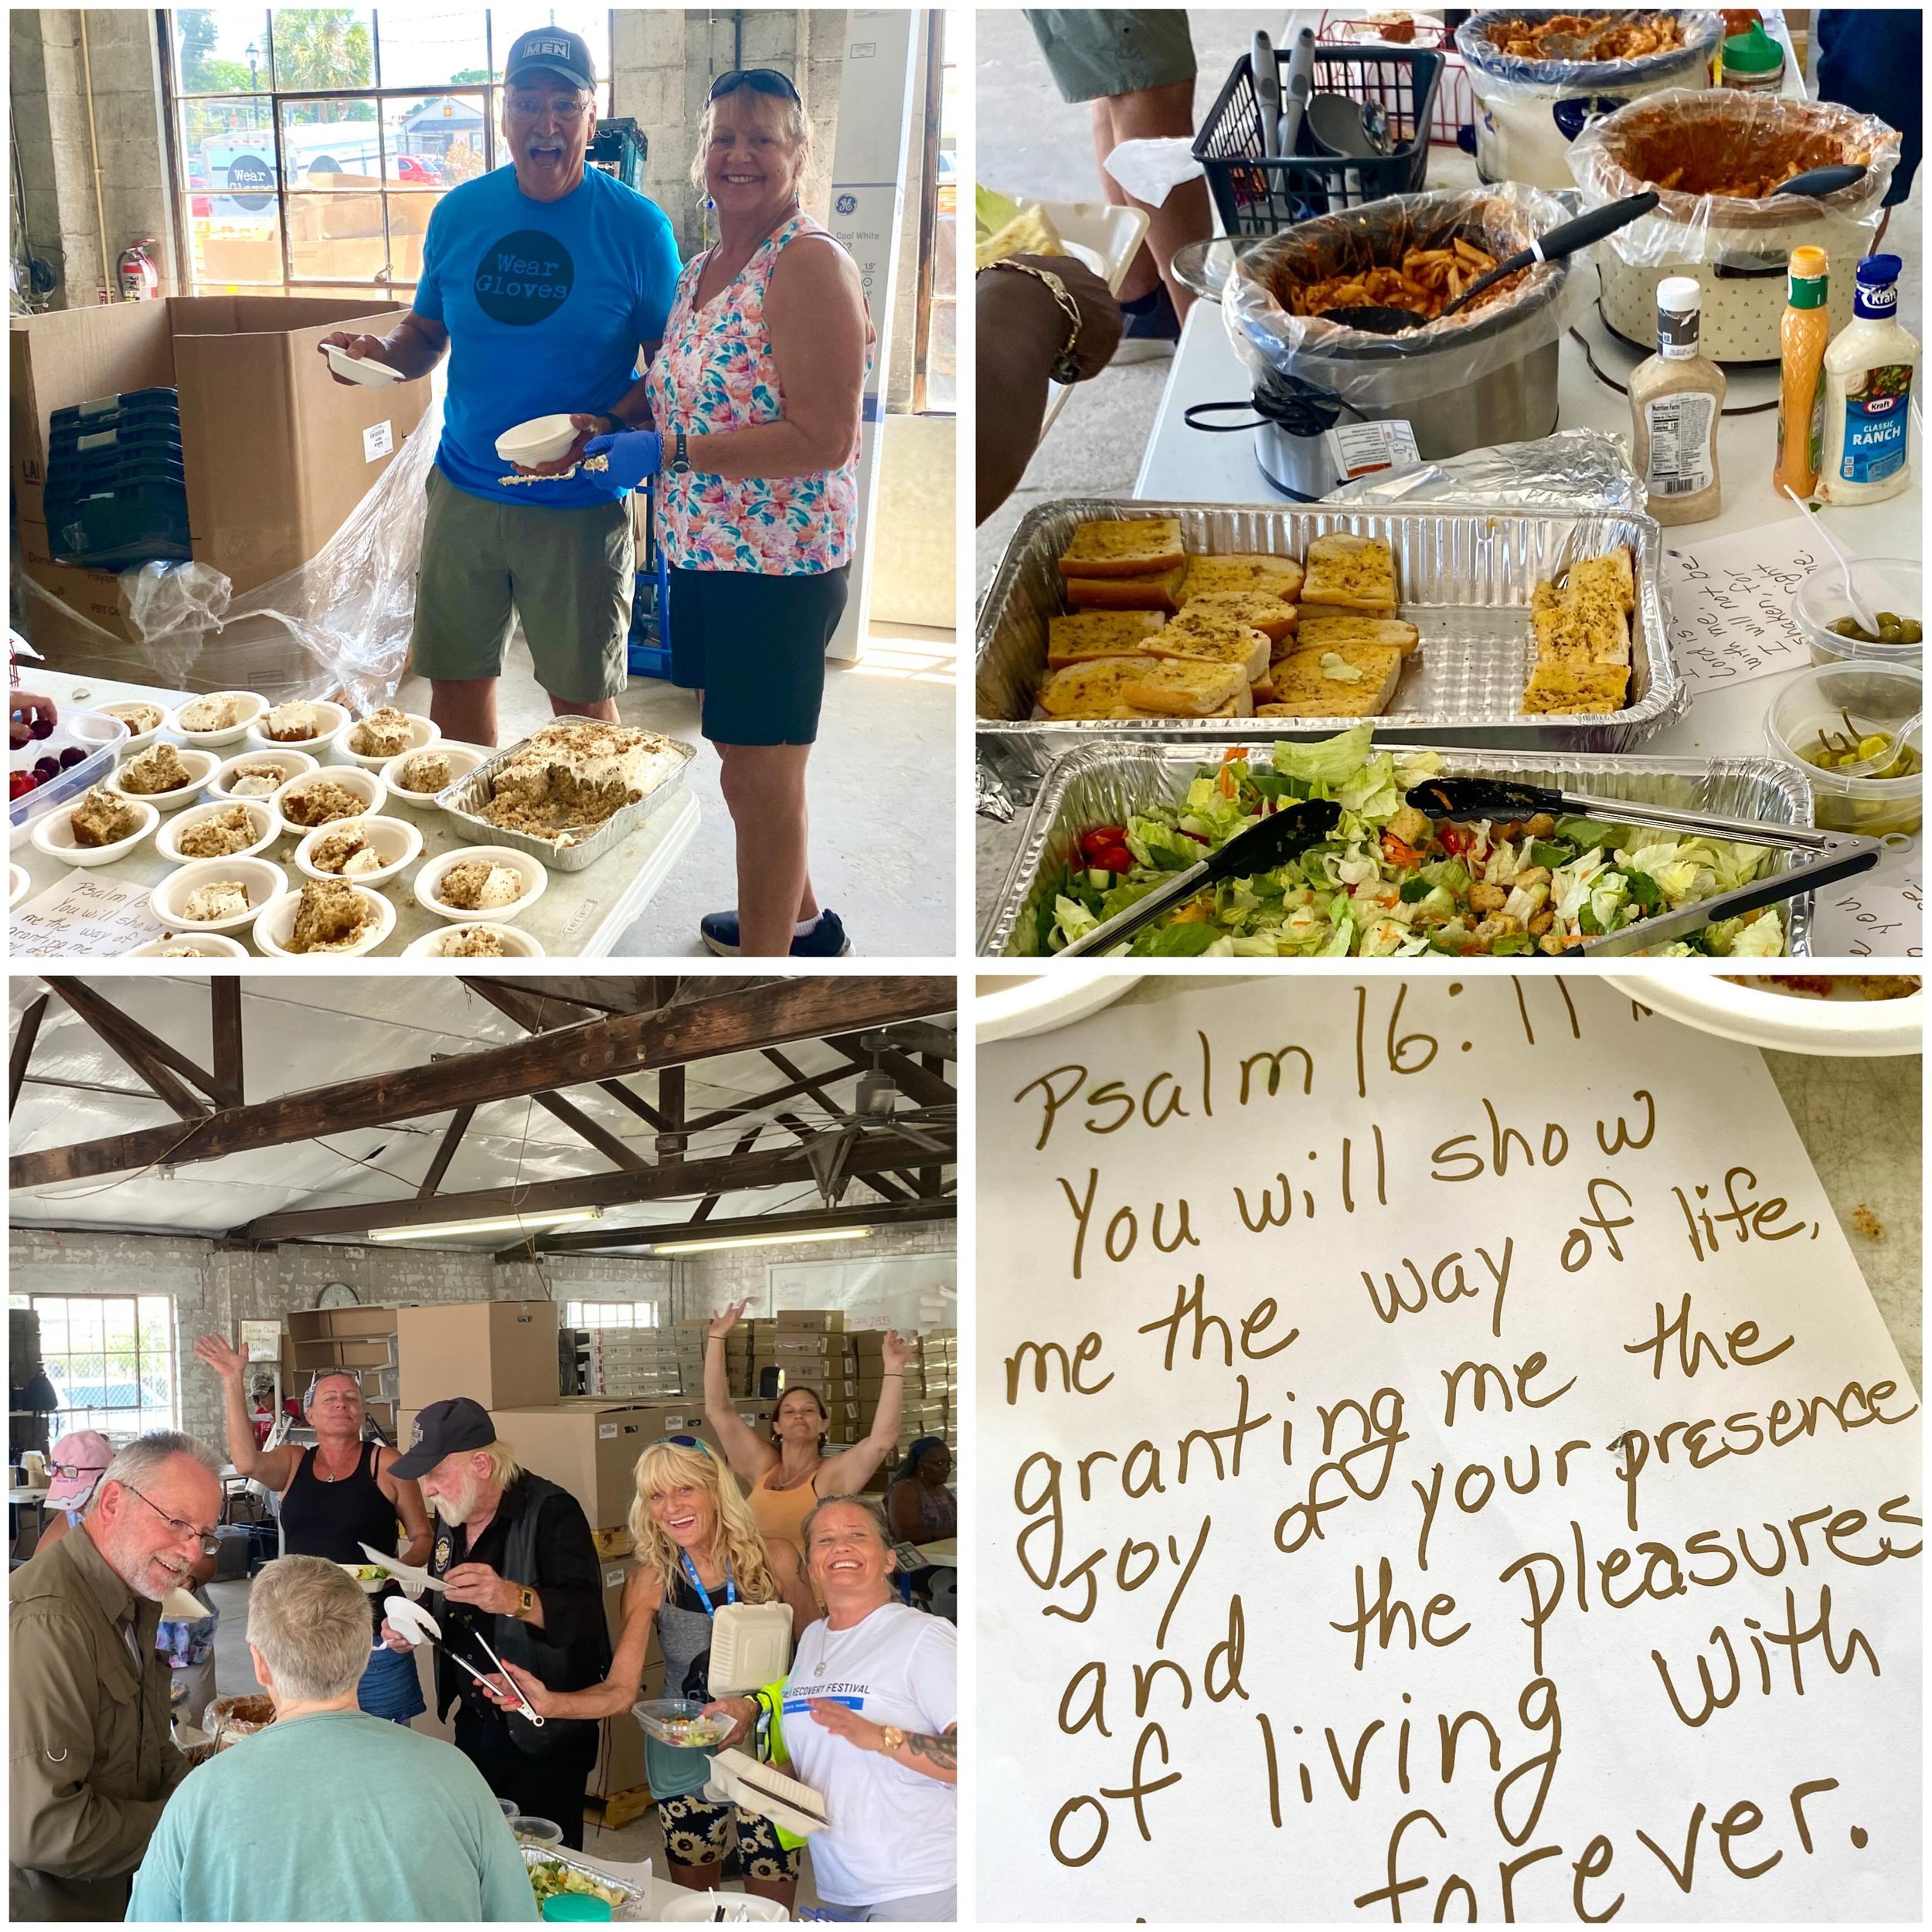 Friday Family meetings!! 💙😁🎉 and a super yummy lunch for our clients provided by John and Carol Semper from @mbcocala and Mr. Burt! We thank you so much! From everyone here at Wear Gloves we hope you have a blessed weekend! 🤩 #dignitynotdependenc